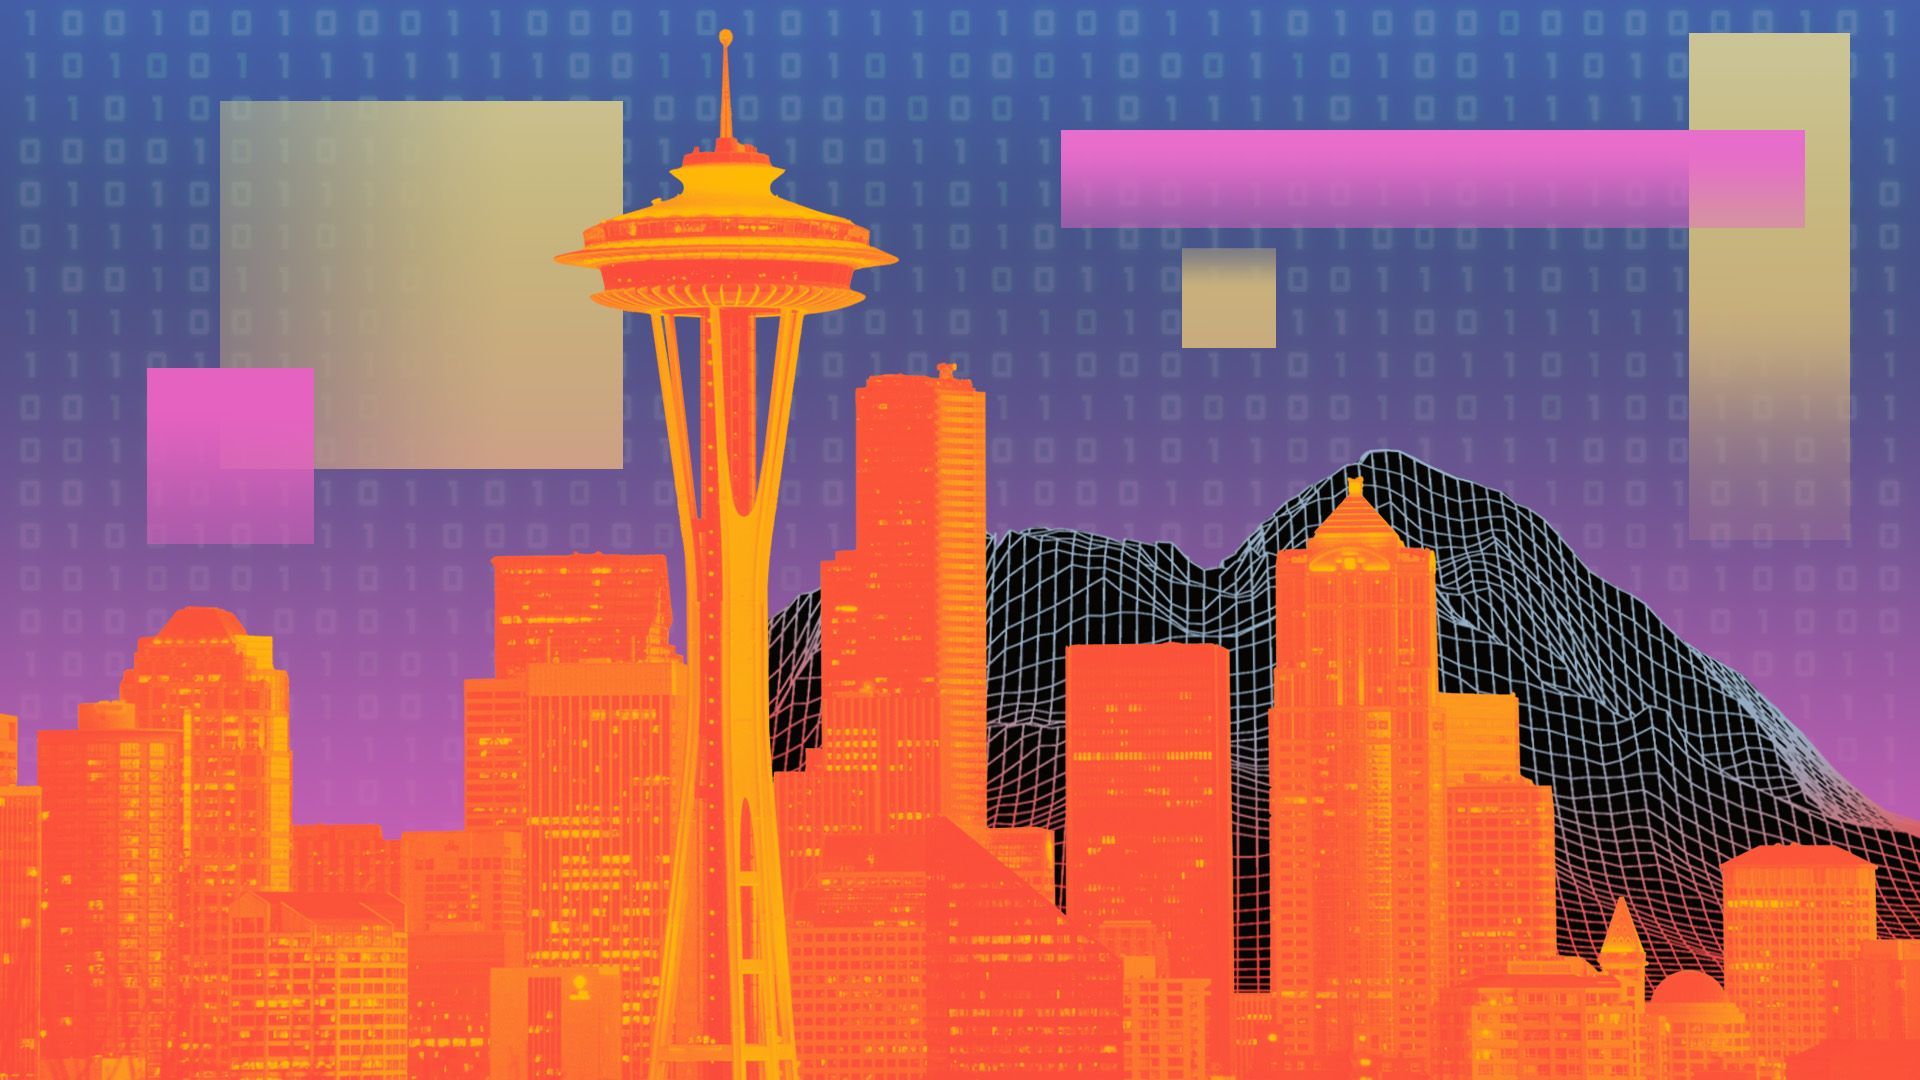 Illustration of the Seattle skyline with a grid-like Mountain Rainer in the background and binary code in the sky with various rectangular shapes